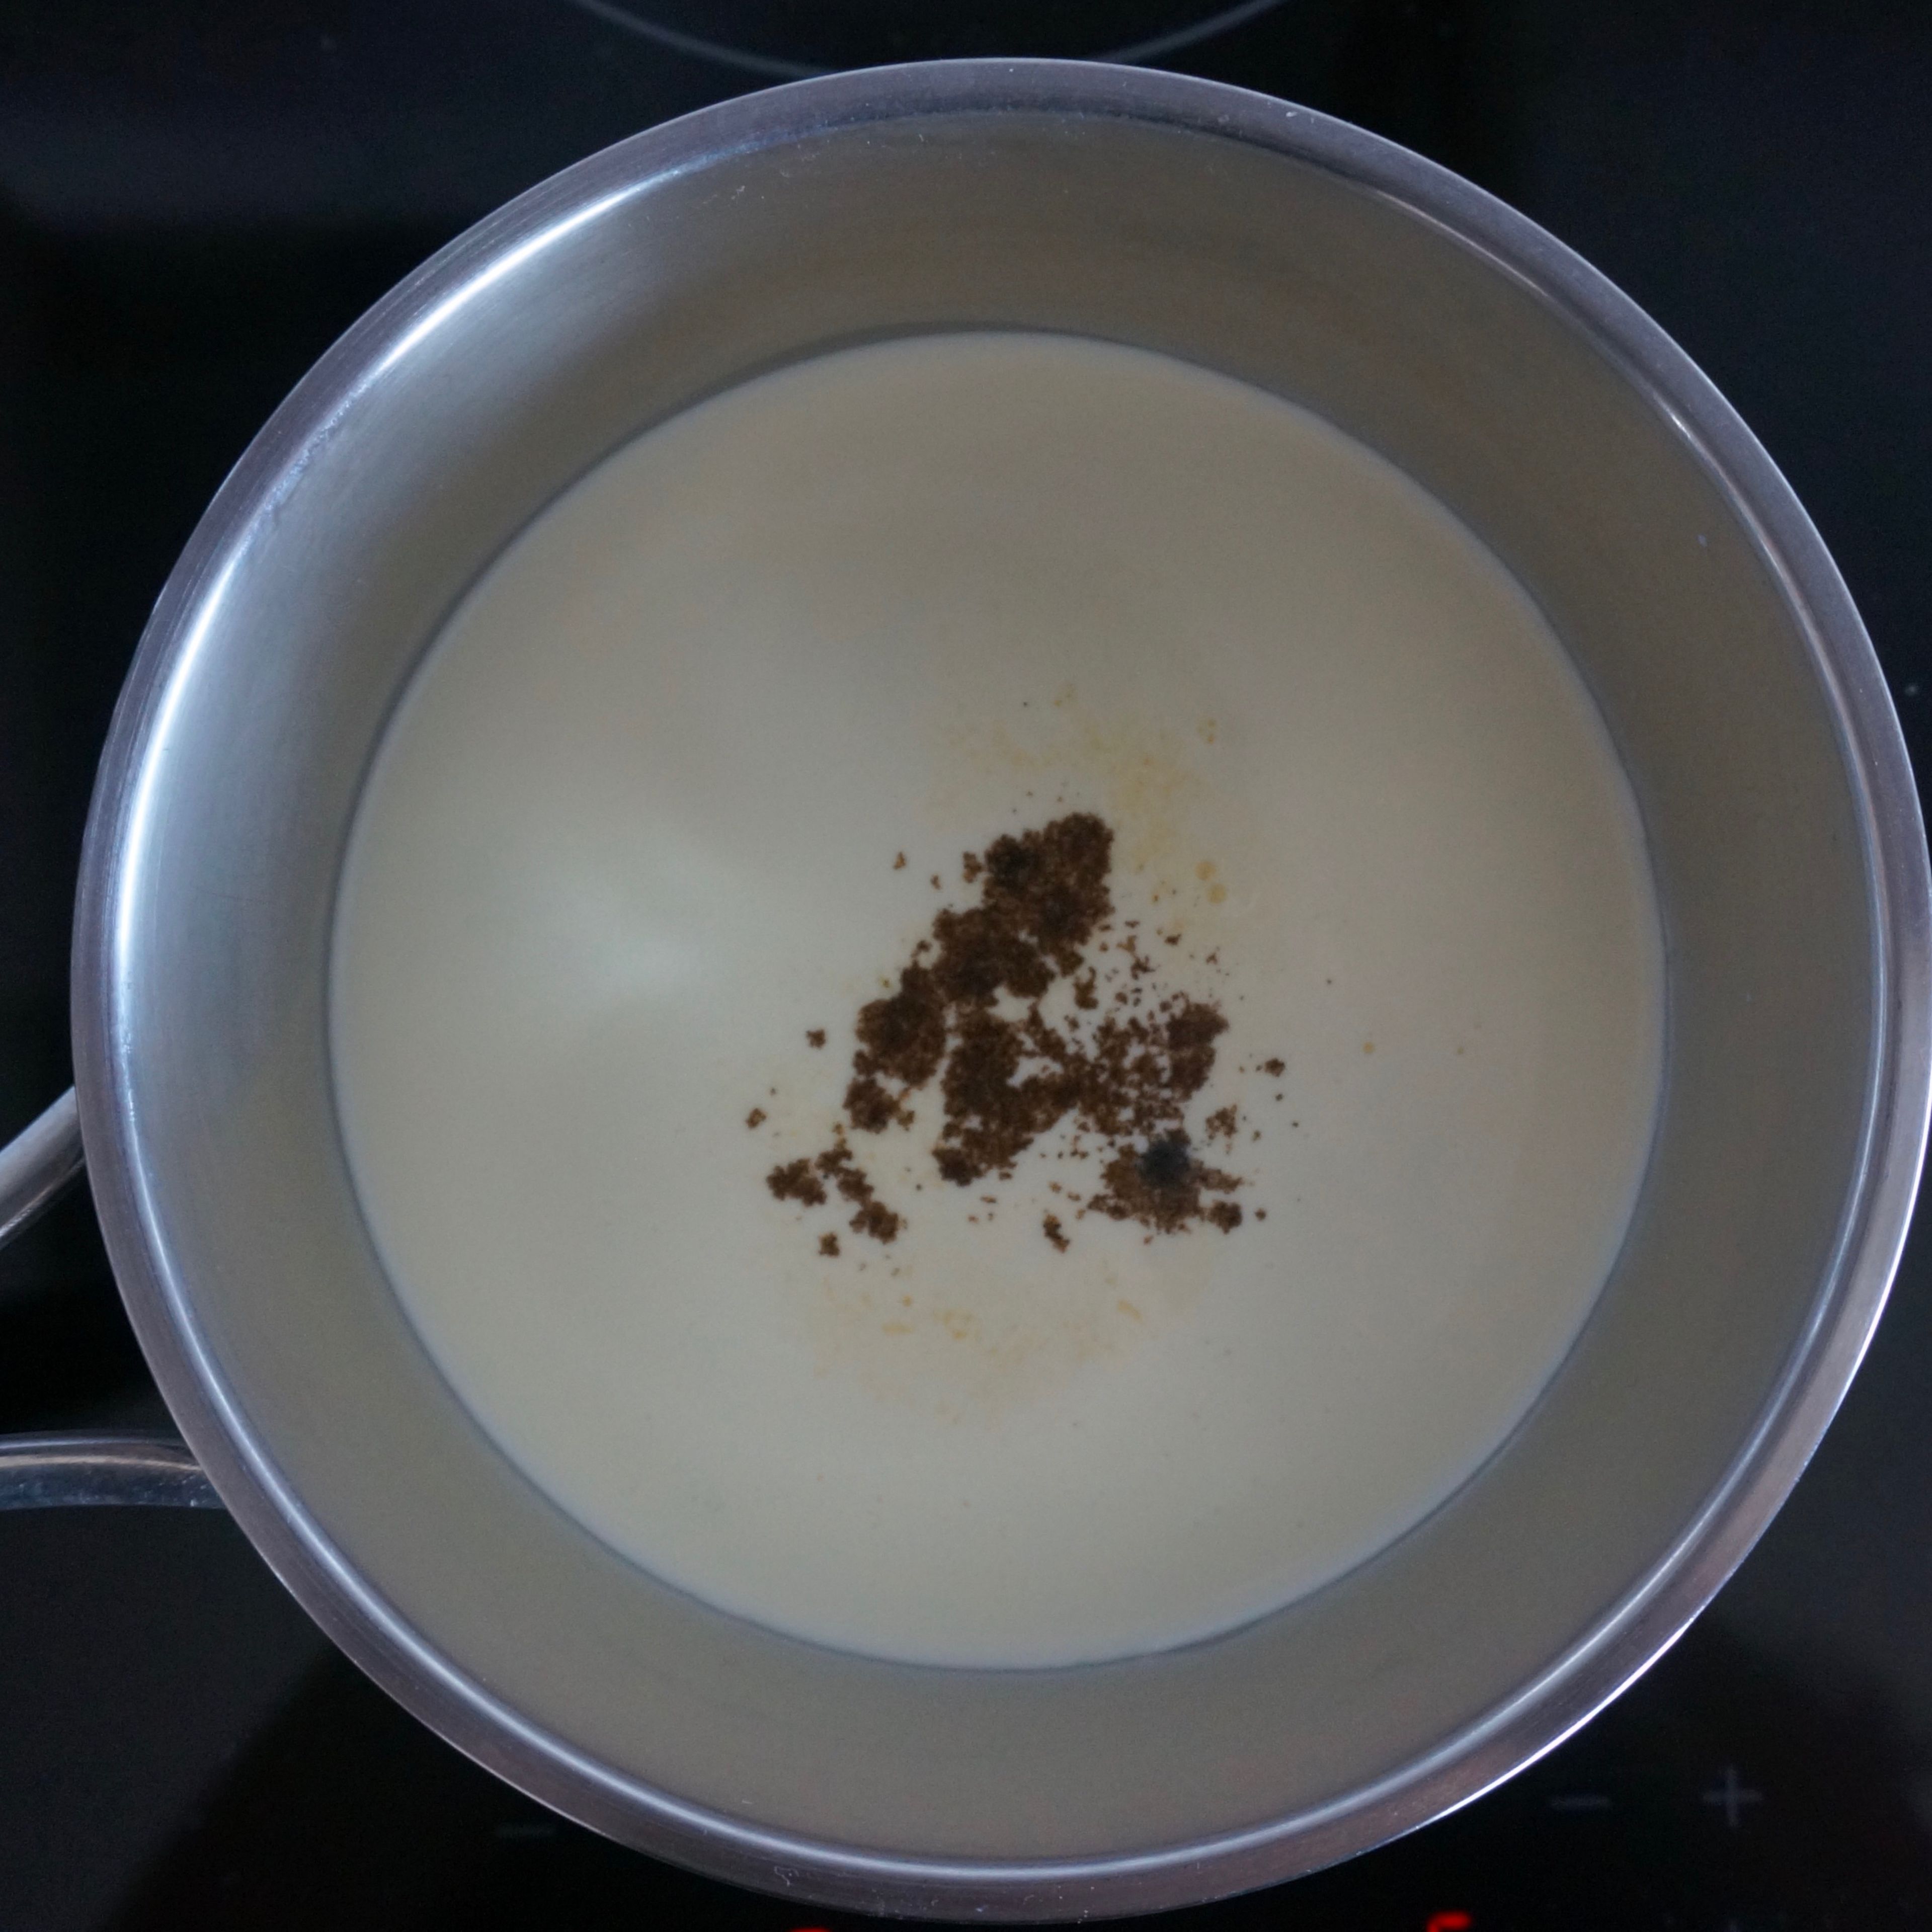 Meanwhile, in a medium saucepan, heat cream, milk, sugar, vanilla sugar, and vanilla seeds on medium heat and bring just to a boil until sugar dissolves. Remove from heat and leave for 5 minutes.